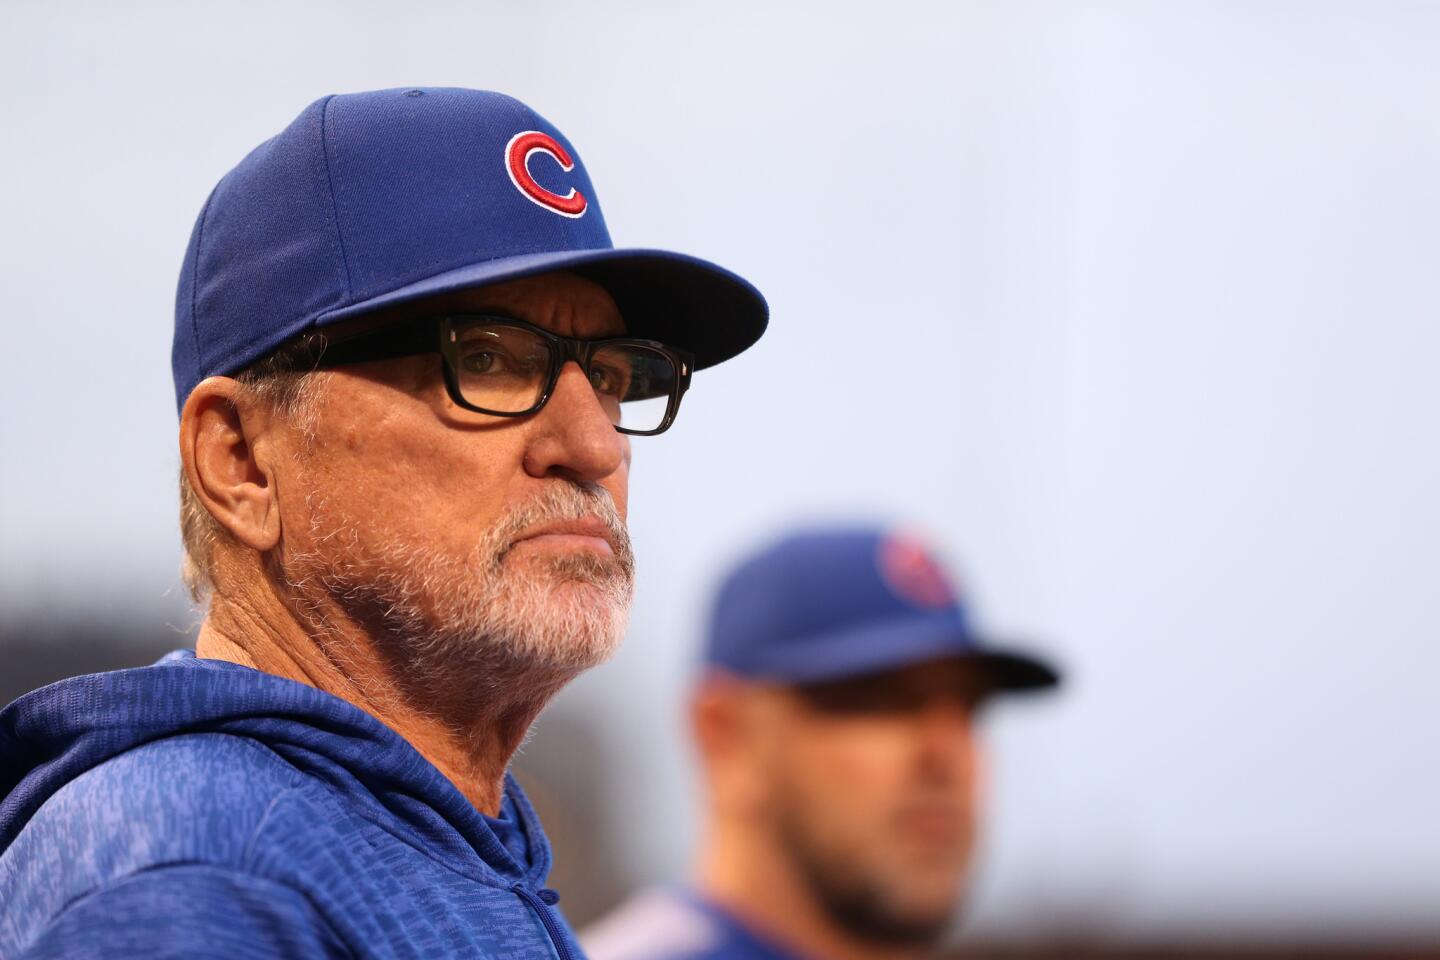 Cubs manager Joe Maddon looks on in the second inning of a game against the Marlins at Wrigley Field on Tuesday, May 8, 2018.